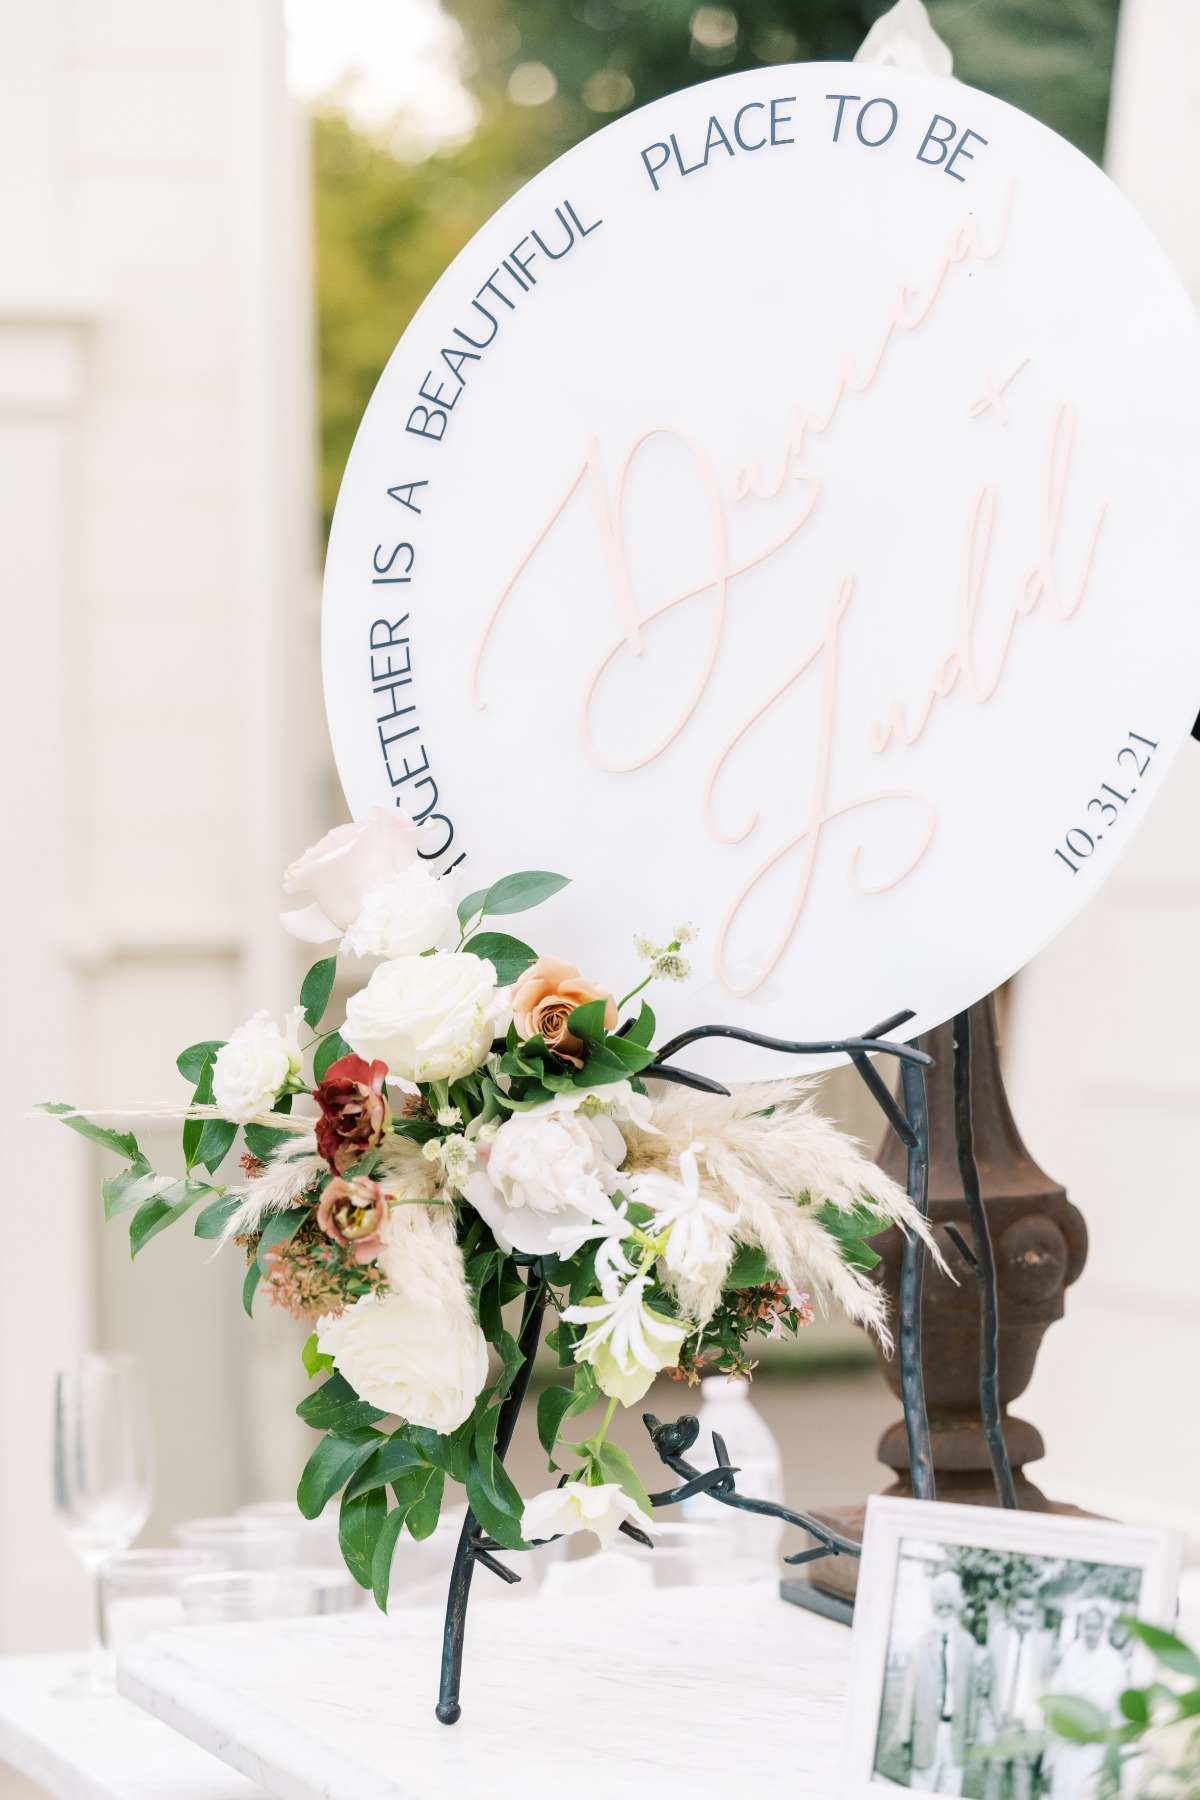 Reception table floral arrangement and sign